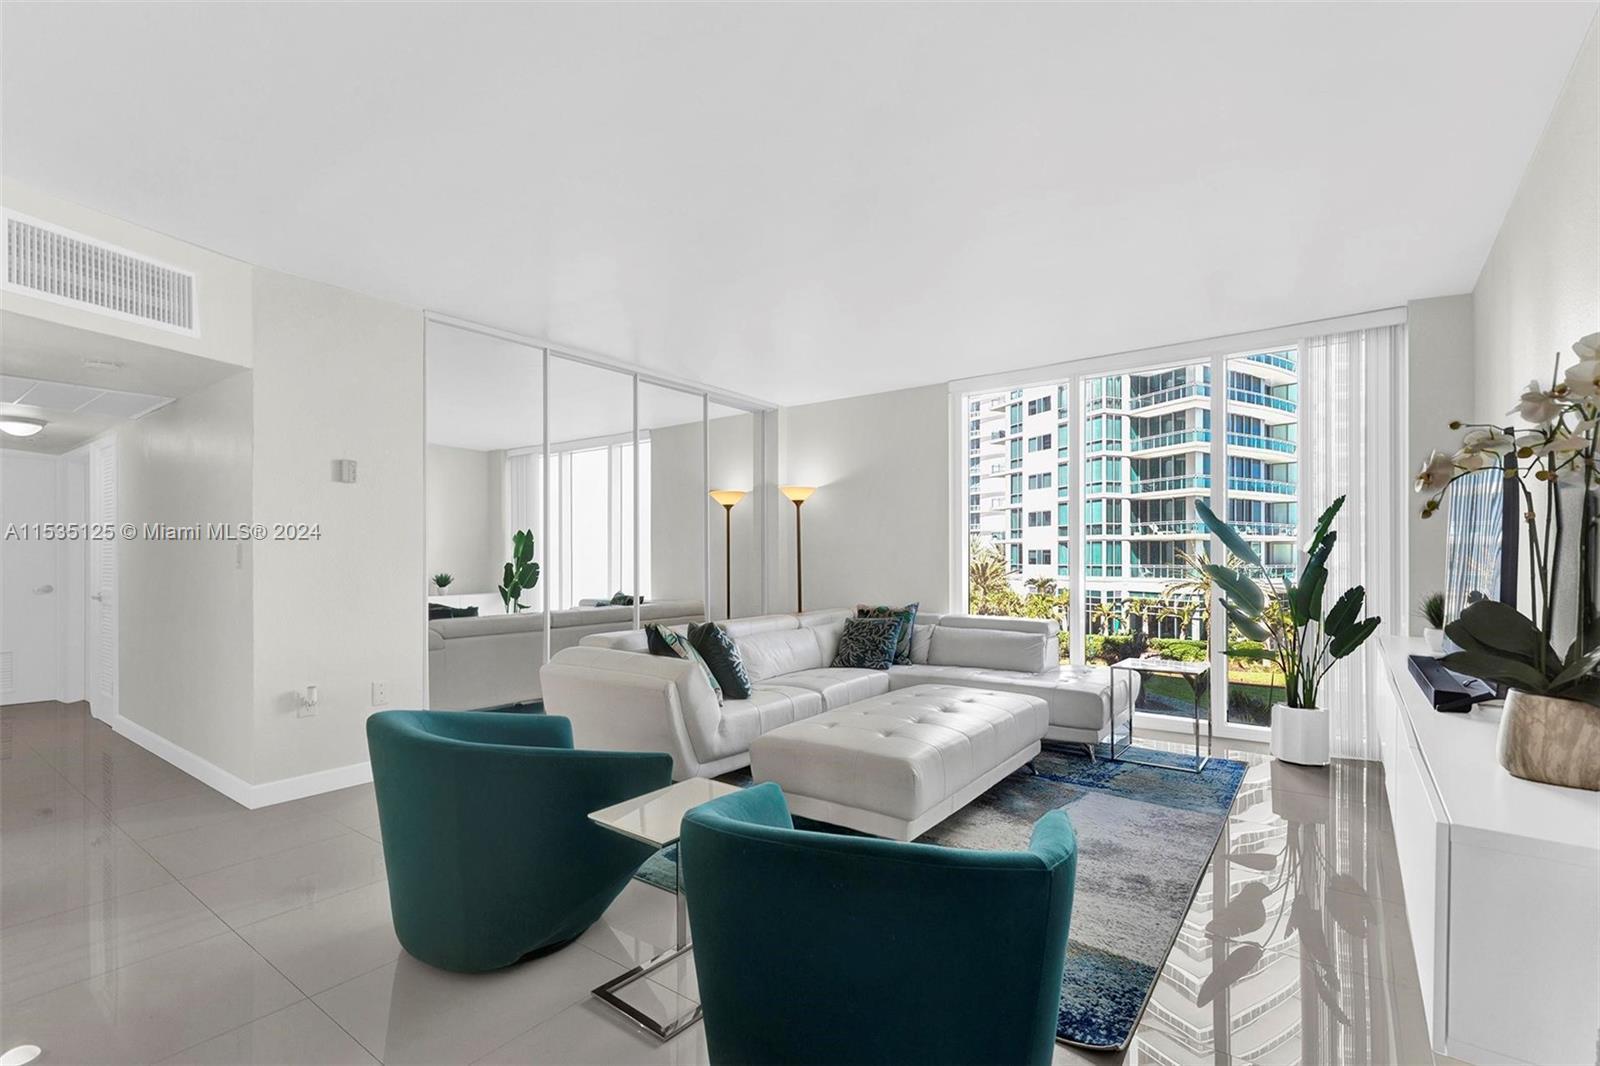 Photo of 10275 Collins Ave #406 in Bal Harbour, FL